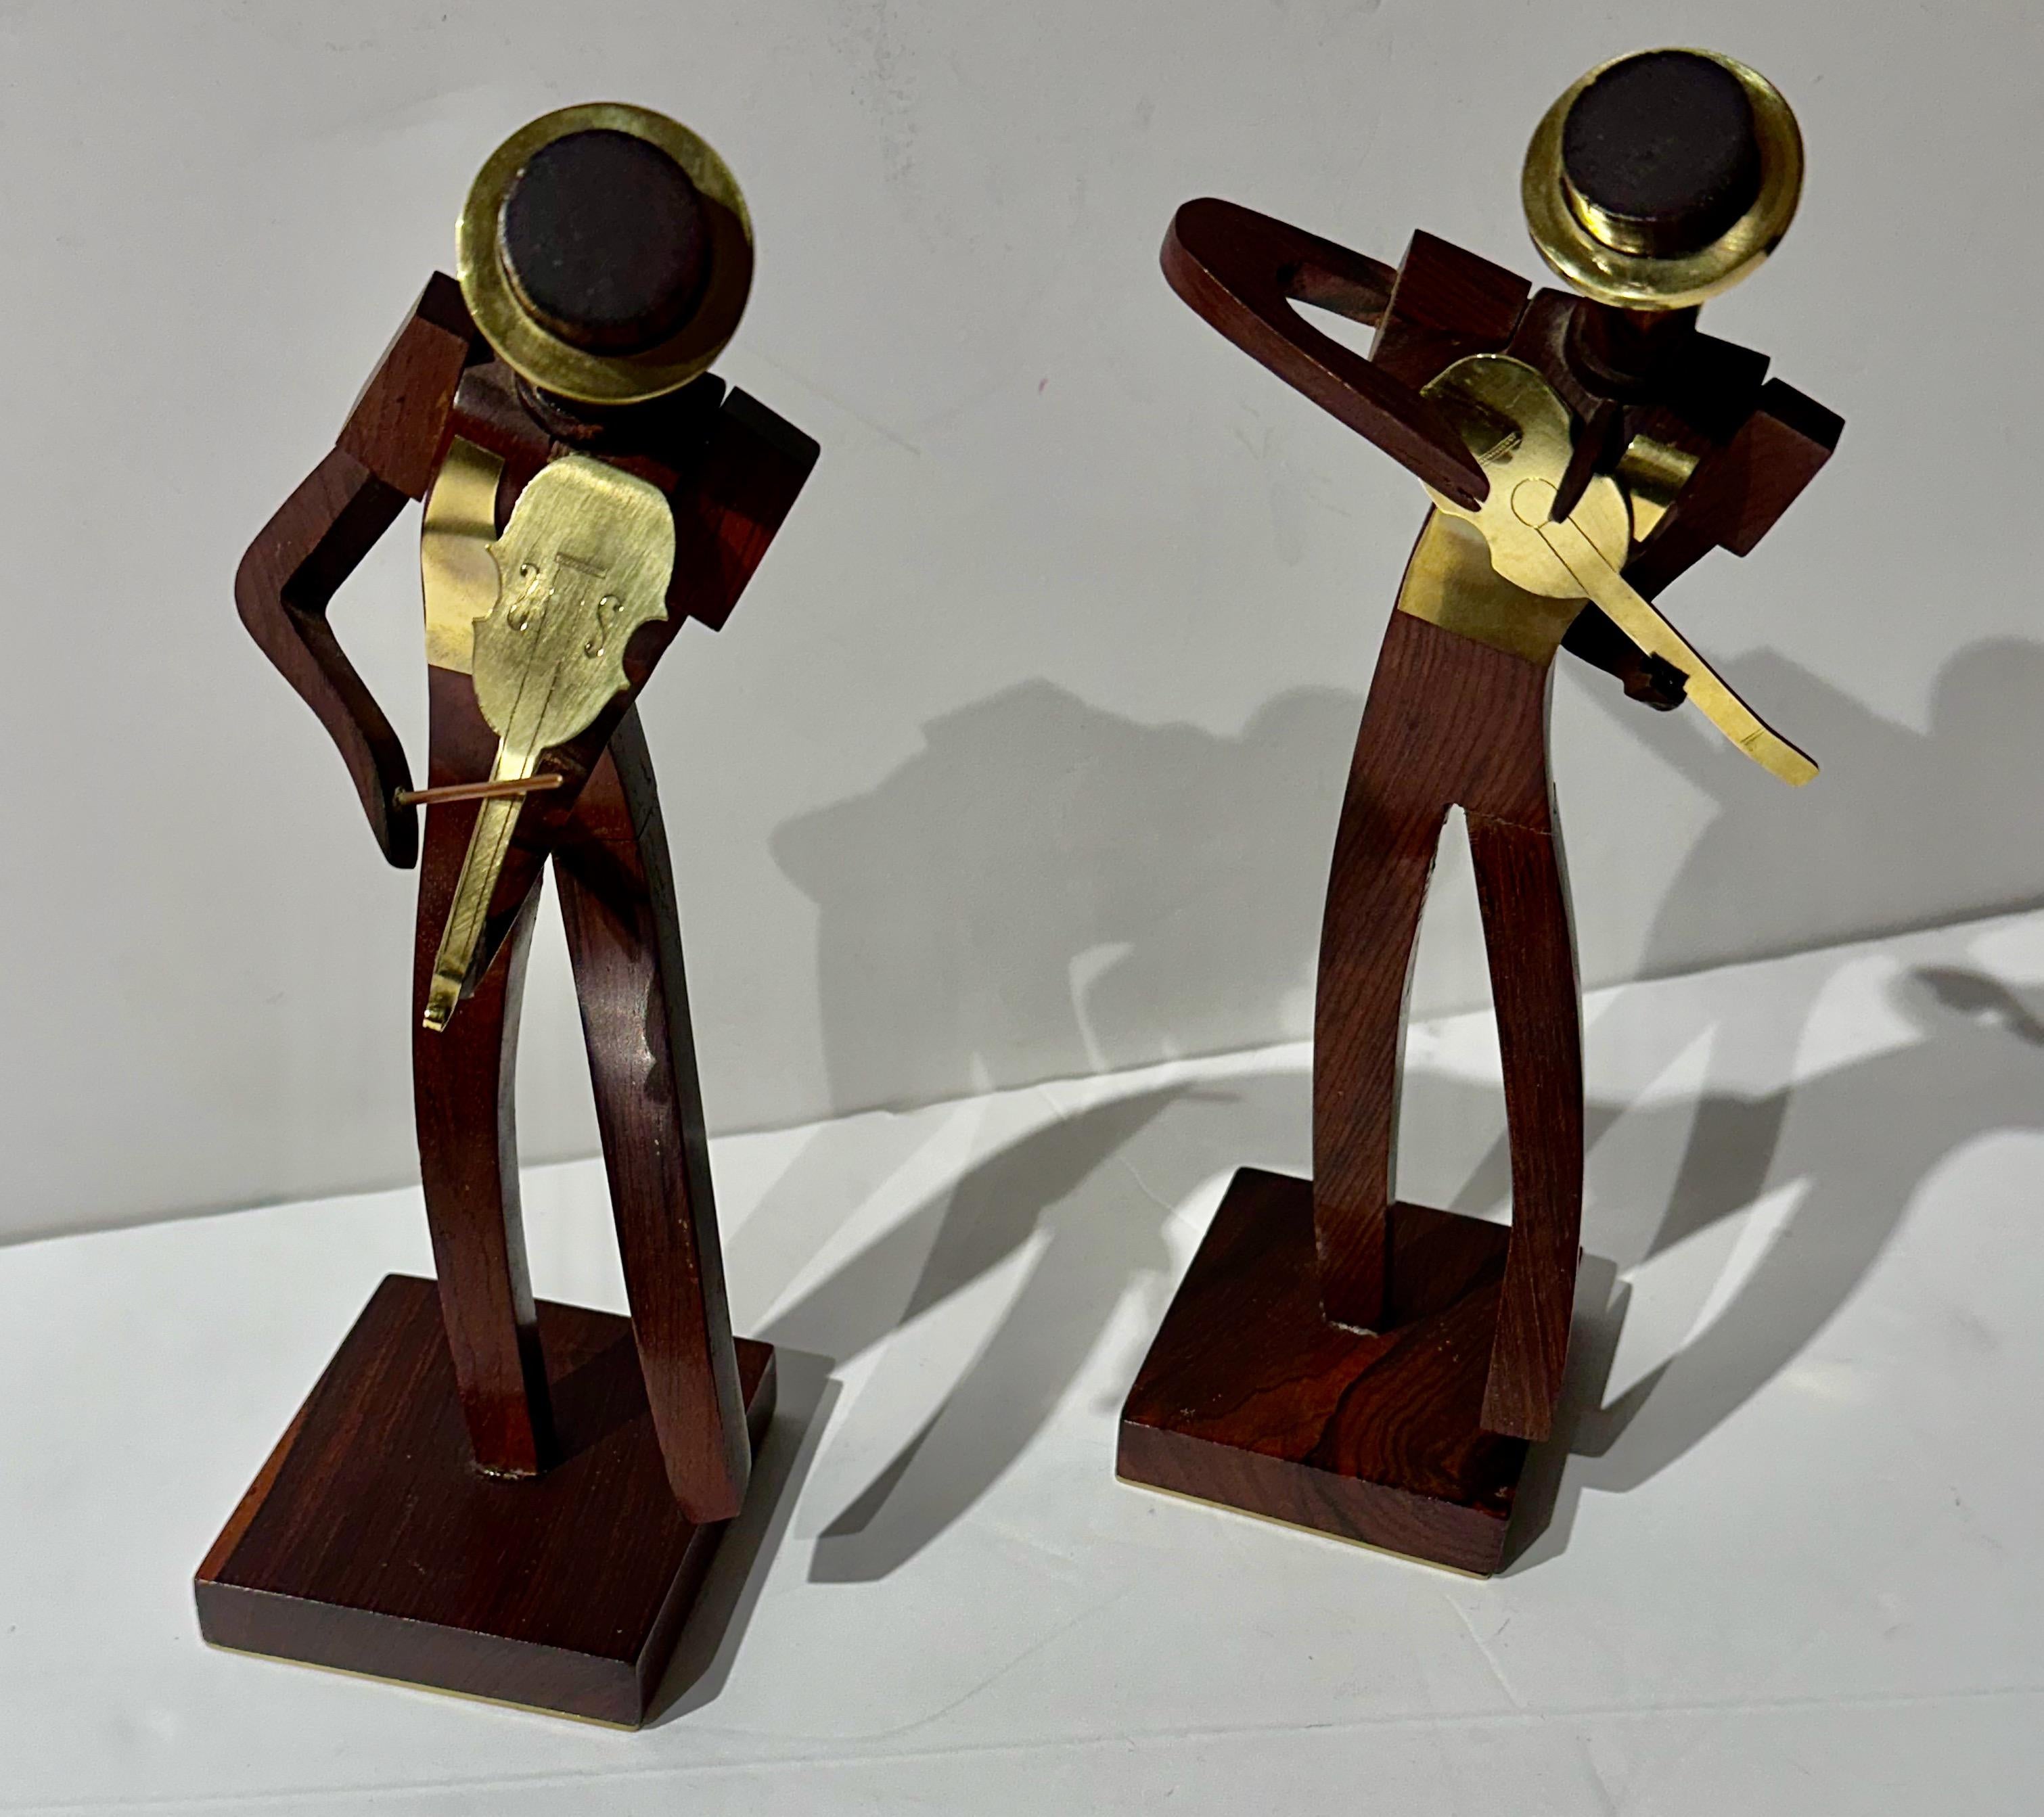 Karl Hagenauer’s Pair of Art Deco Bronze & Wood Musicians showcases his mastery in the Art Deco style. As an influential Austrian designer and goldsmith, Karl Hagenauer followed in the footsteps of his father, Carl Hagenauer, who established